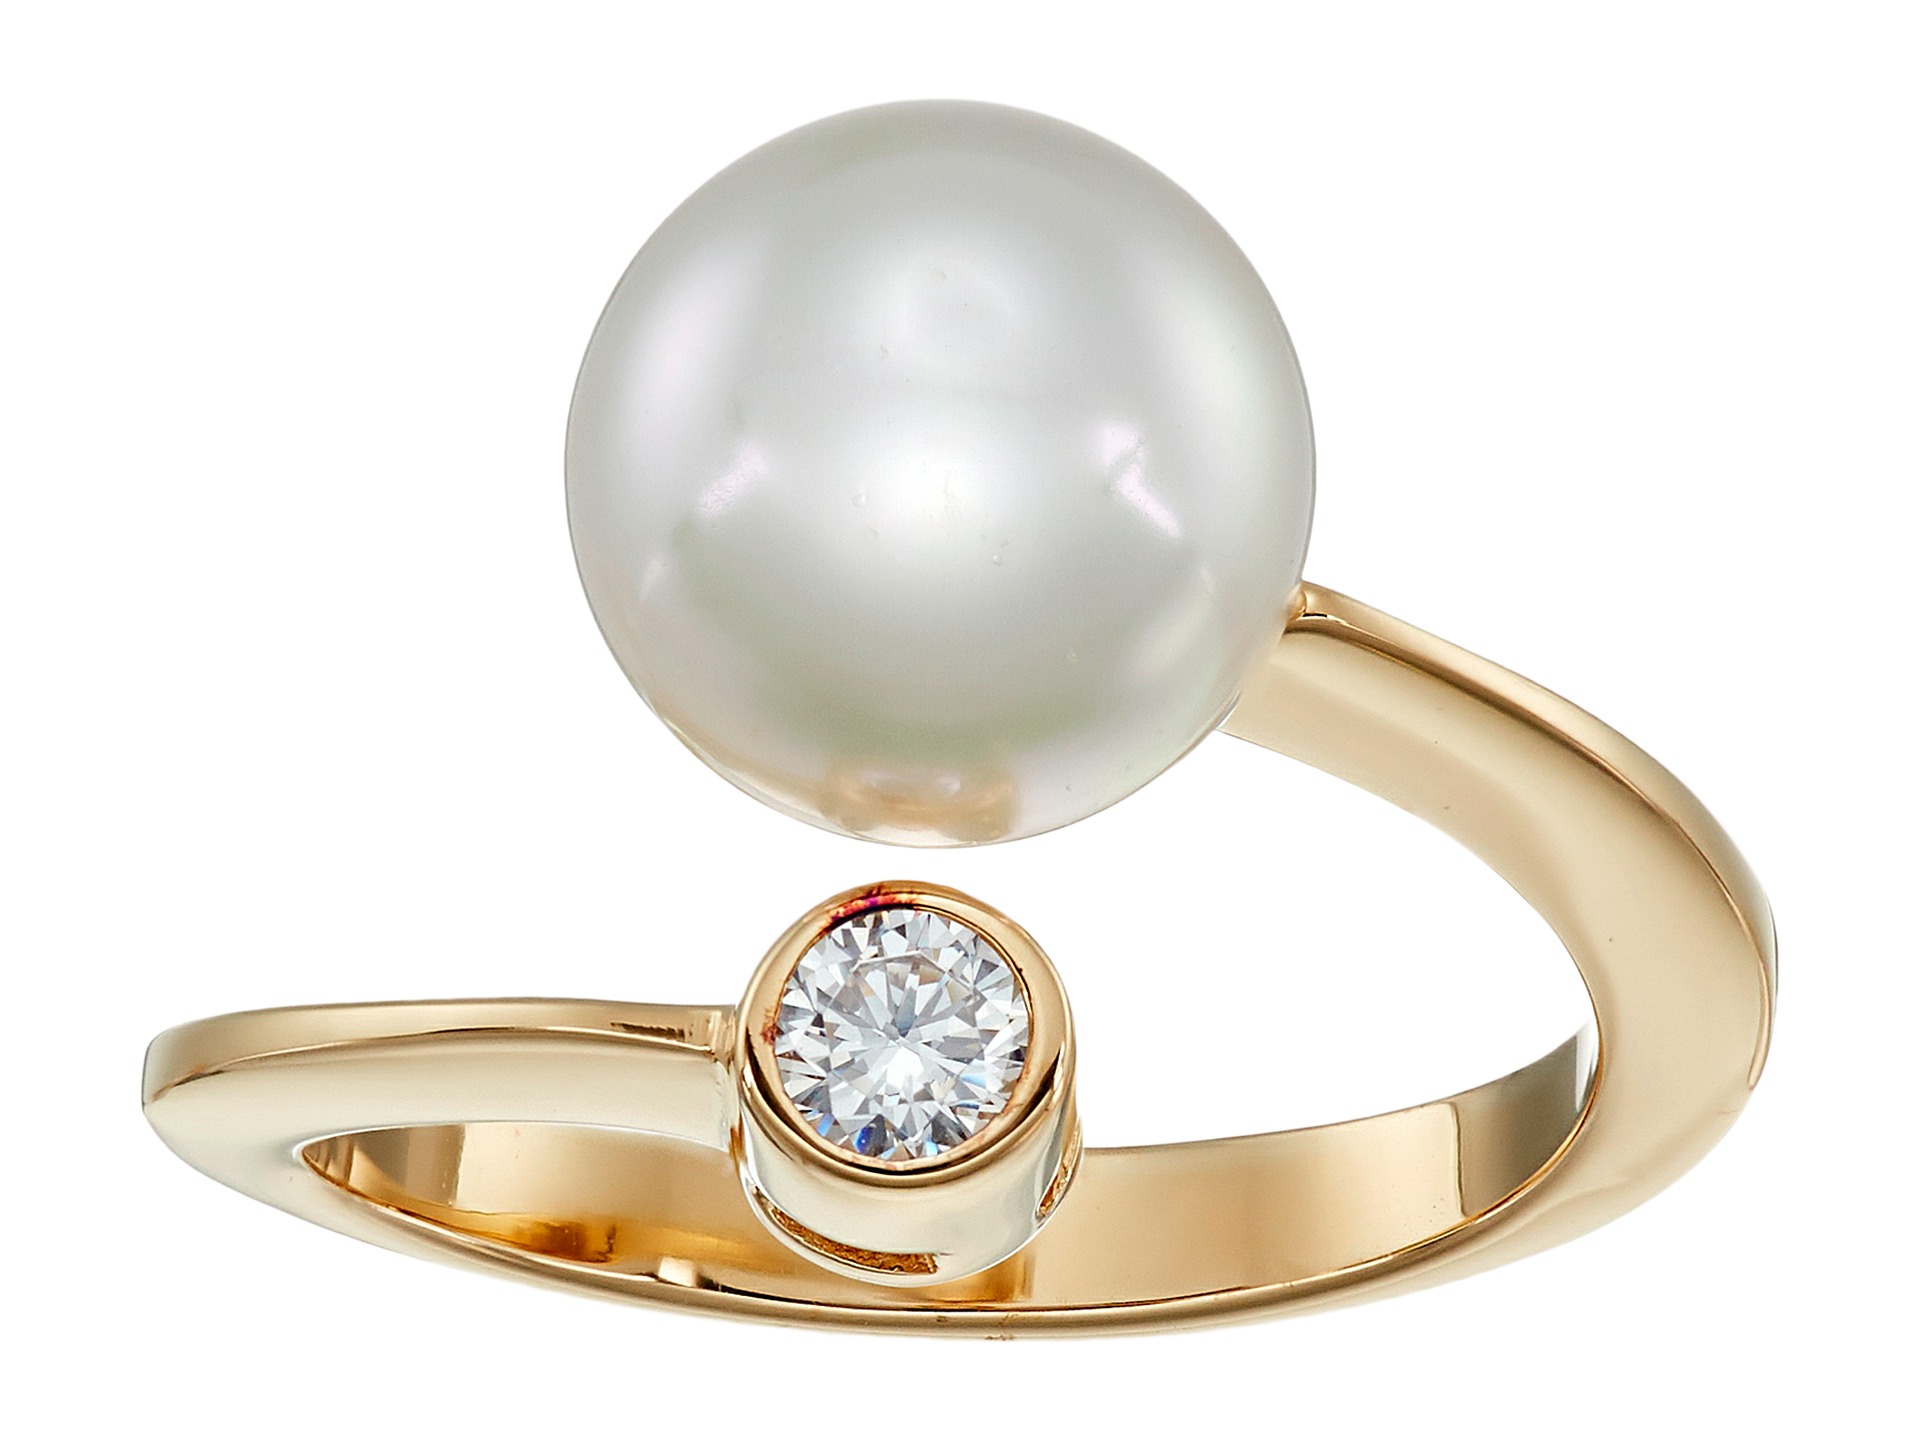 Majorica 10mm Pearl & CZ Wrap Ring at